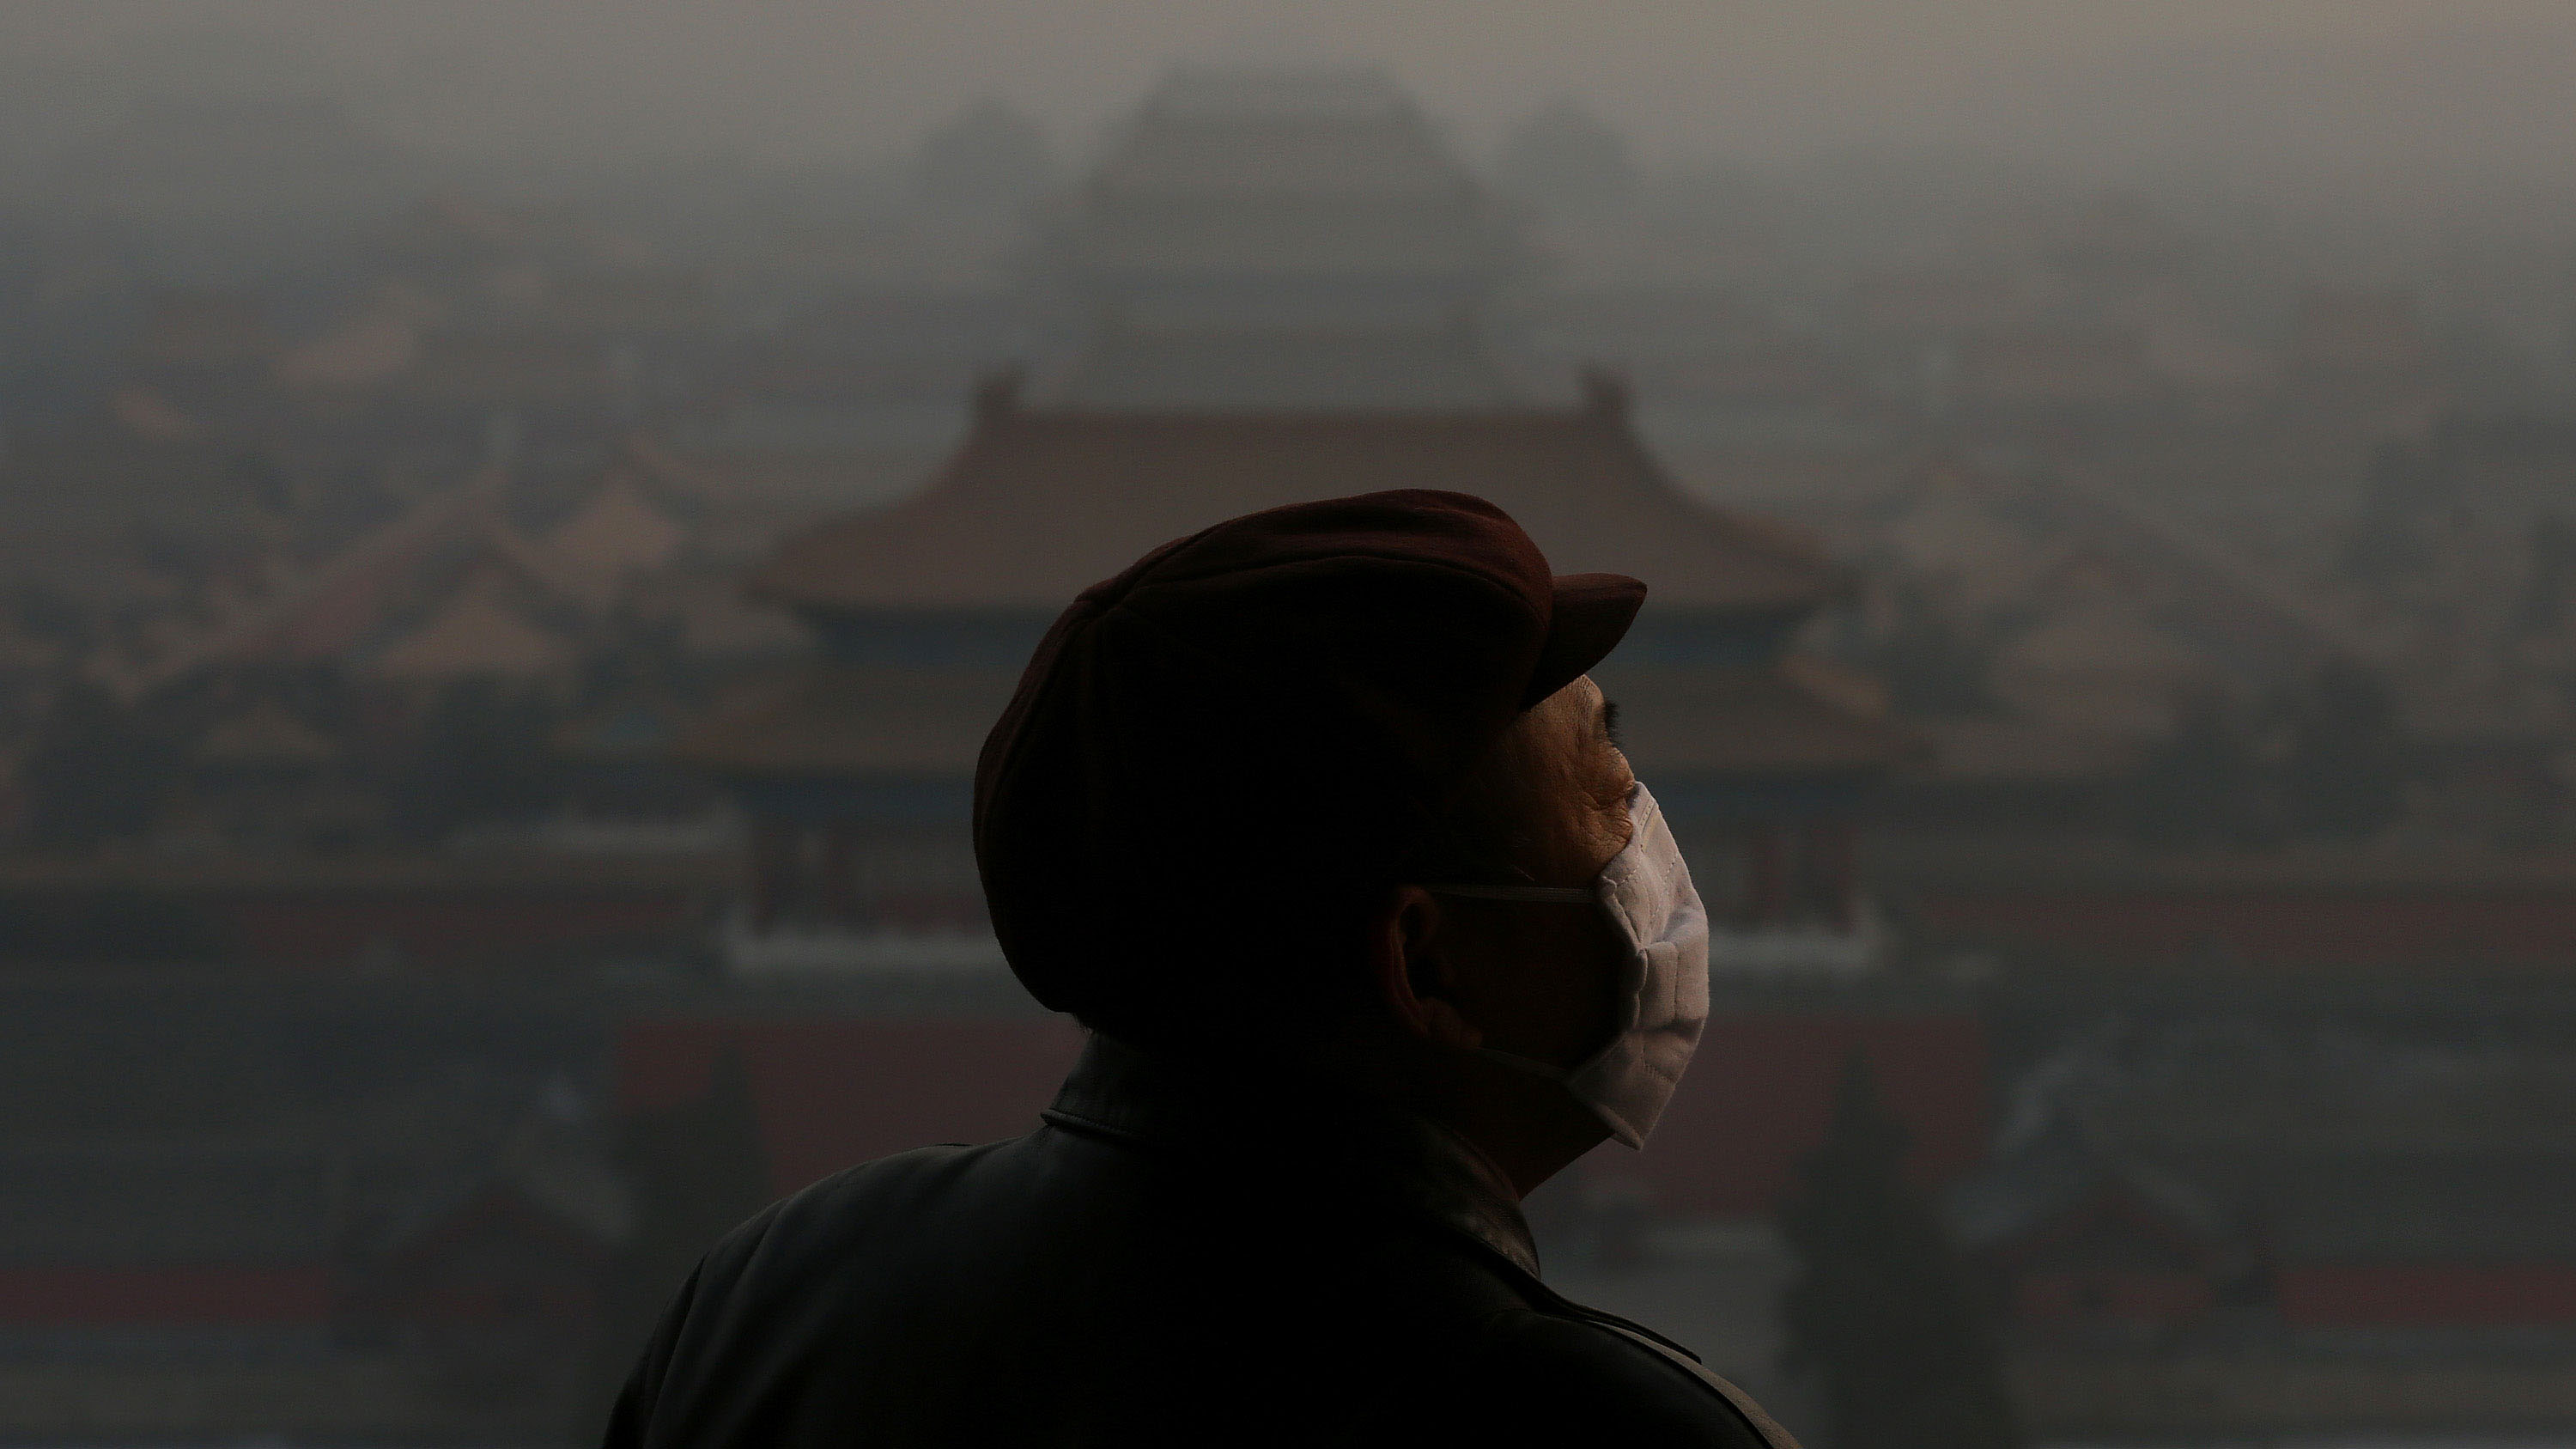 Heavy smog shrouded the Forbidden City in Beijing, China as a tourist looks on.  